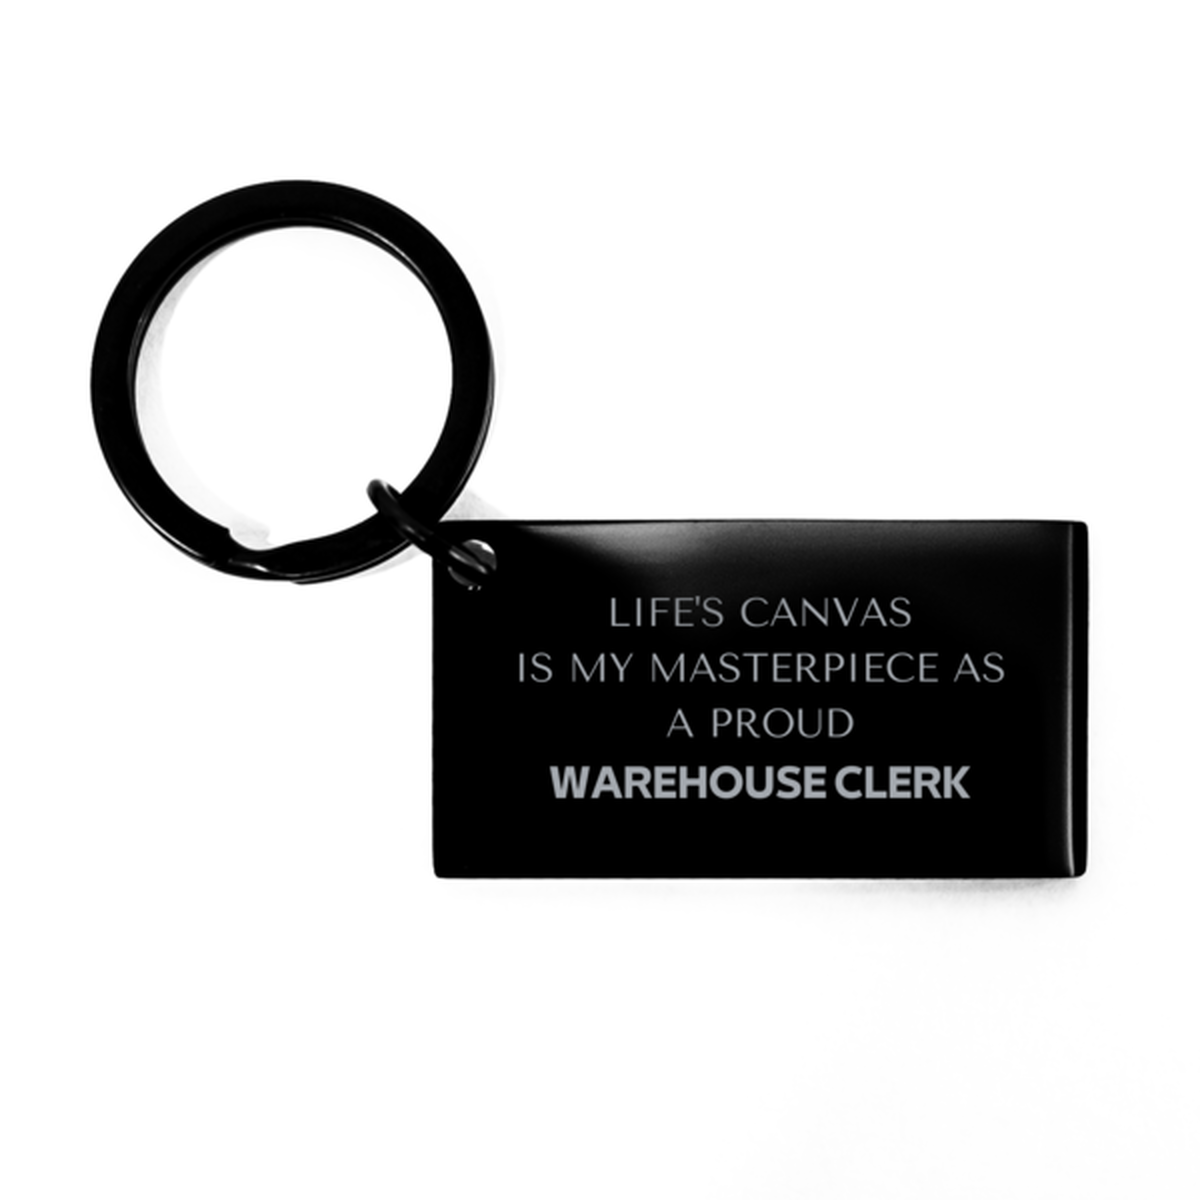 Proud Warehouse Clerk Gifts, Life's canvas is my masterpiece, Epic Birthday Christmas Unique Keychain For Warehouse Clerk, Coworkers, Men, Women, Friends